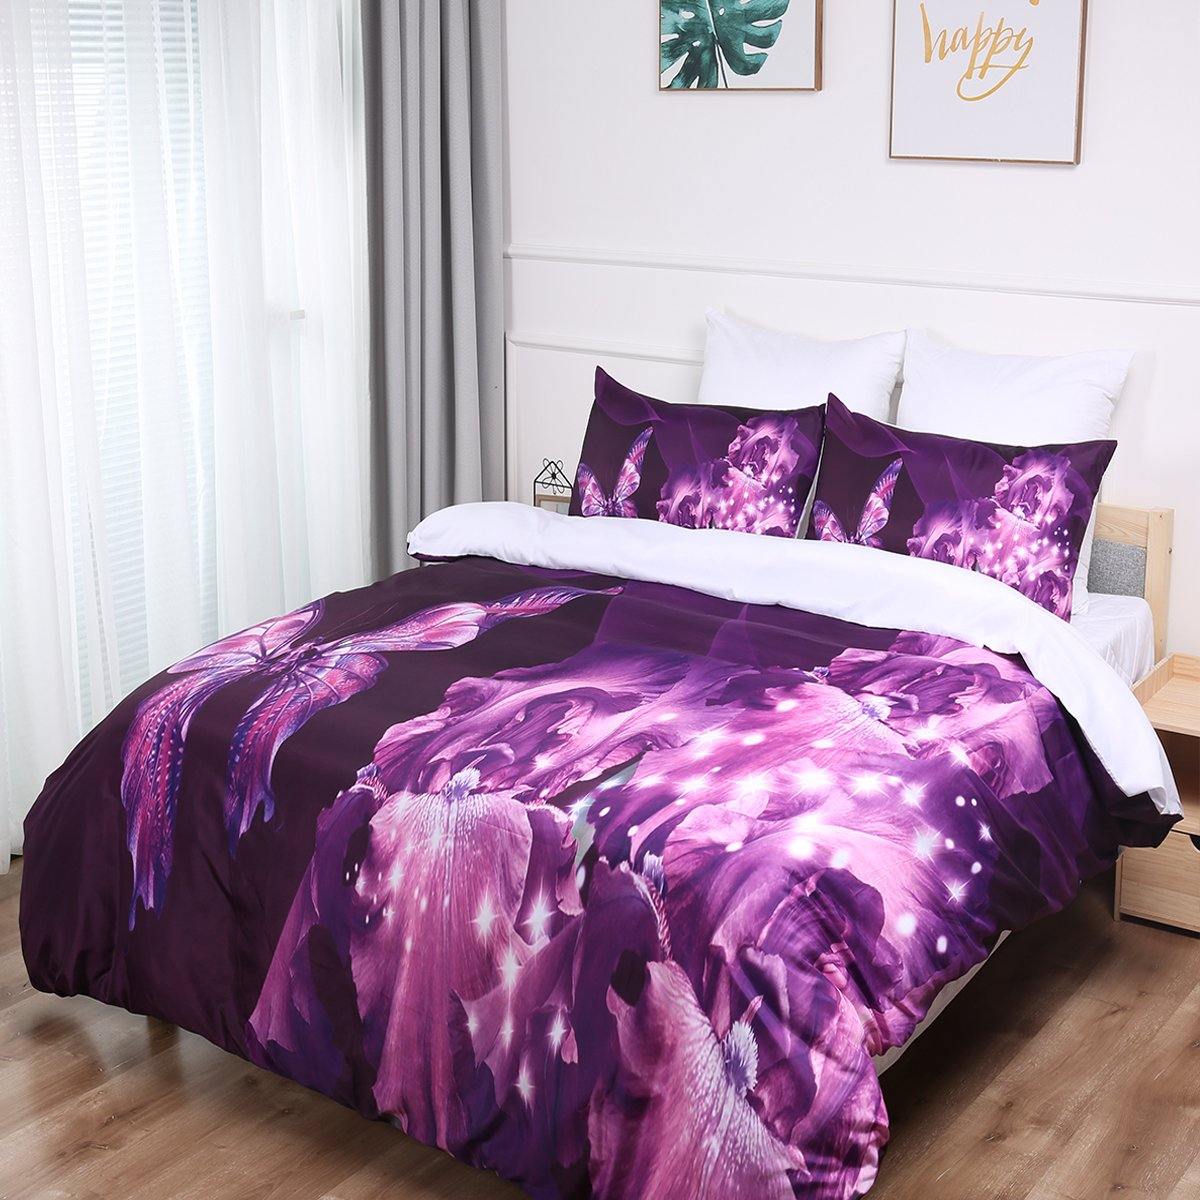 WONGS BEDDING purple dream style butterfly and flower print bedding bedroom homeware - Wongs bedding